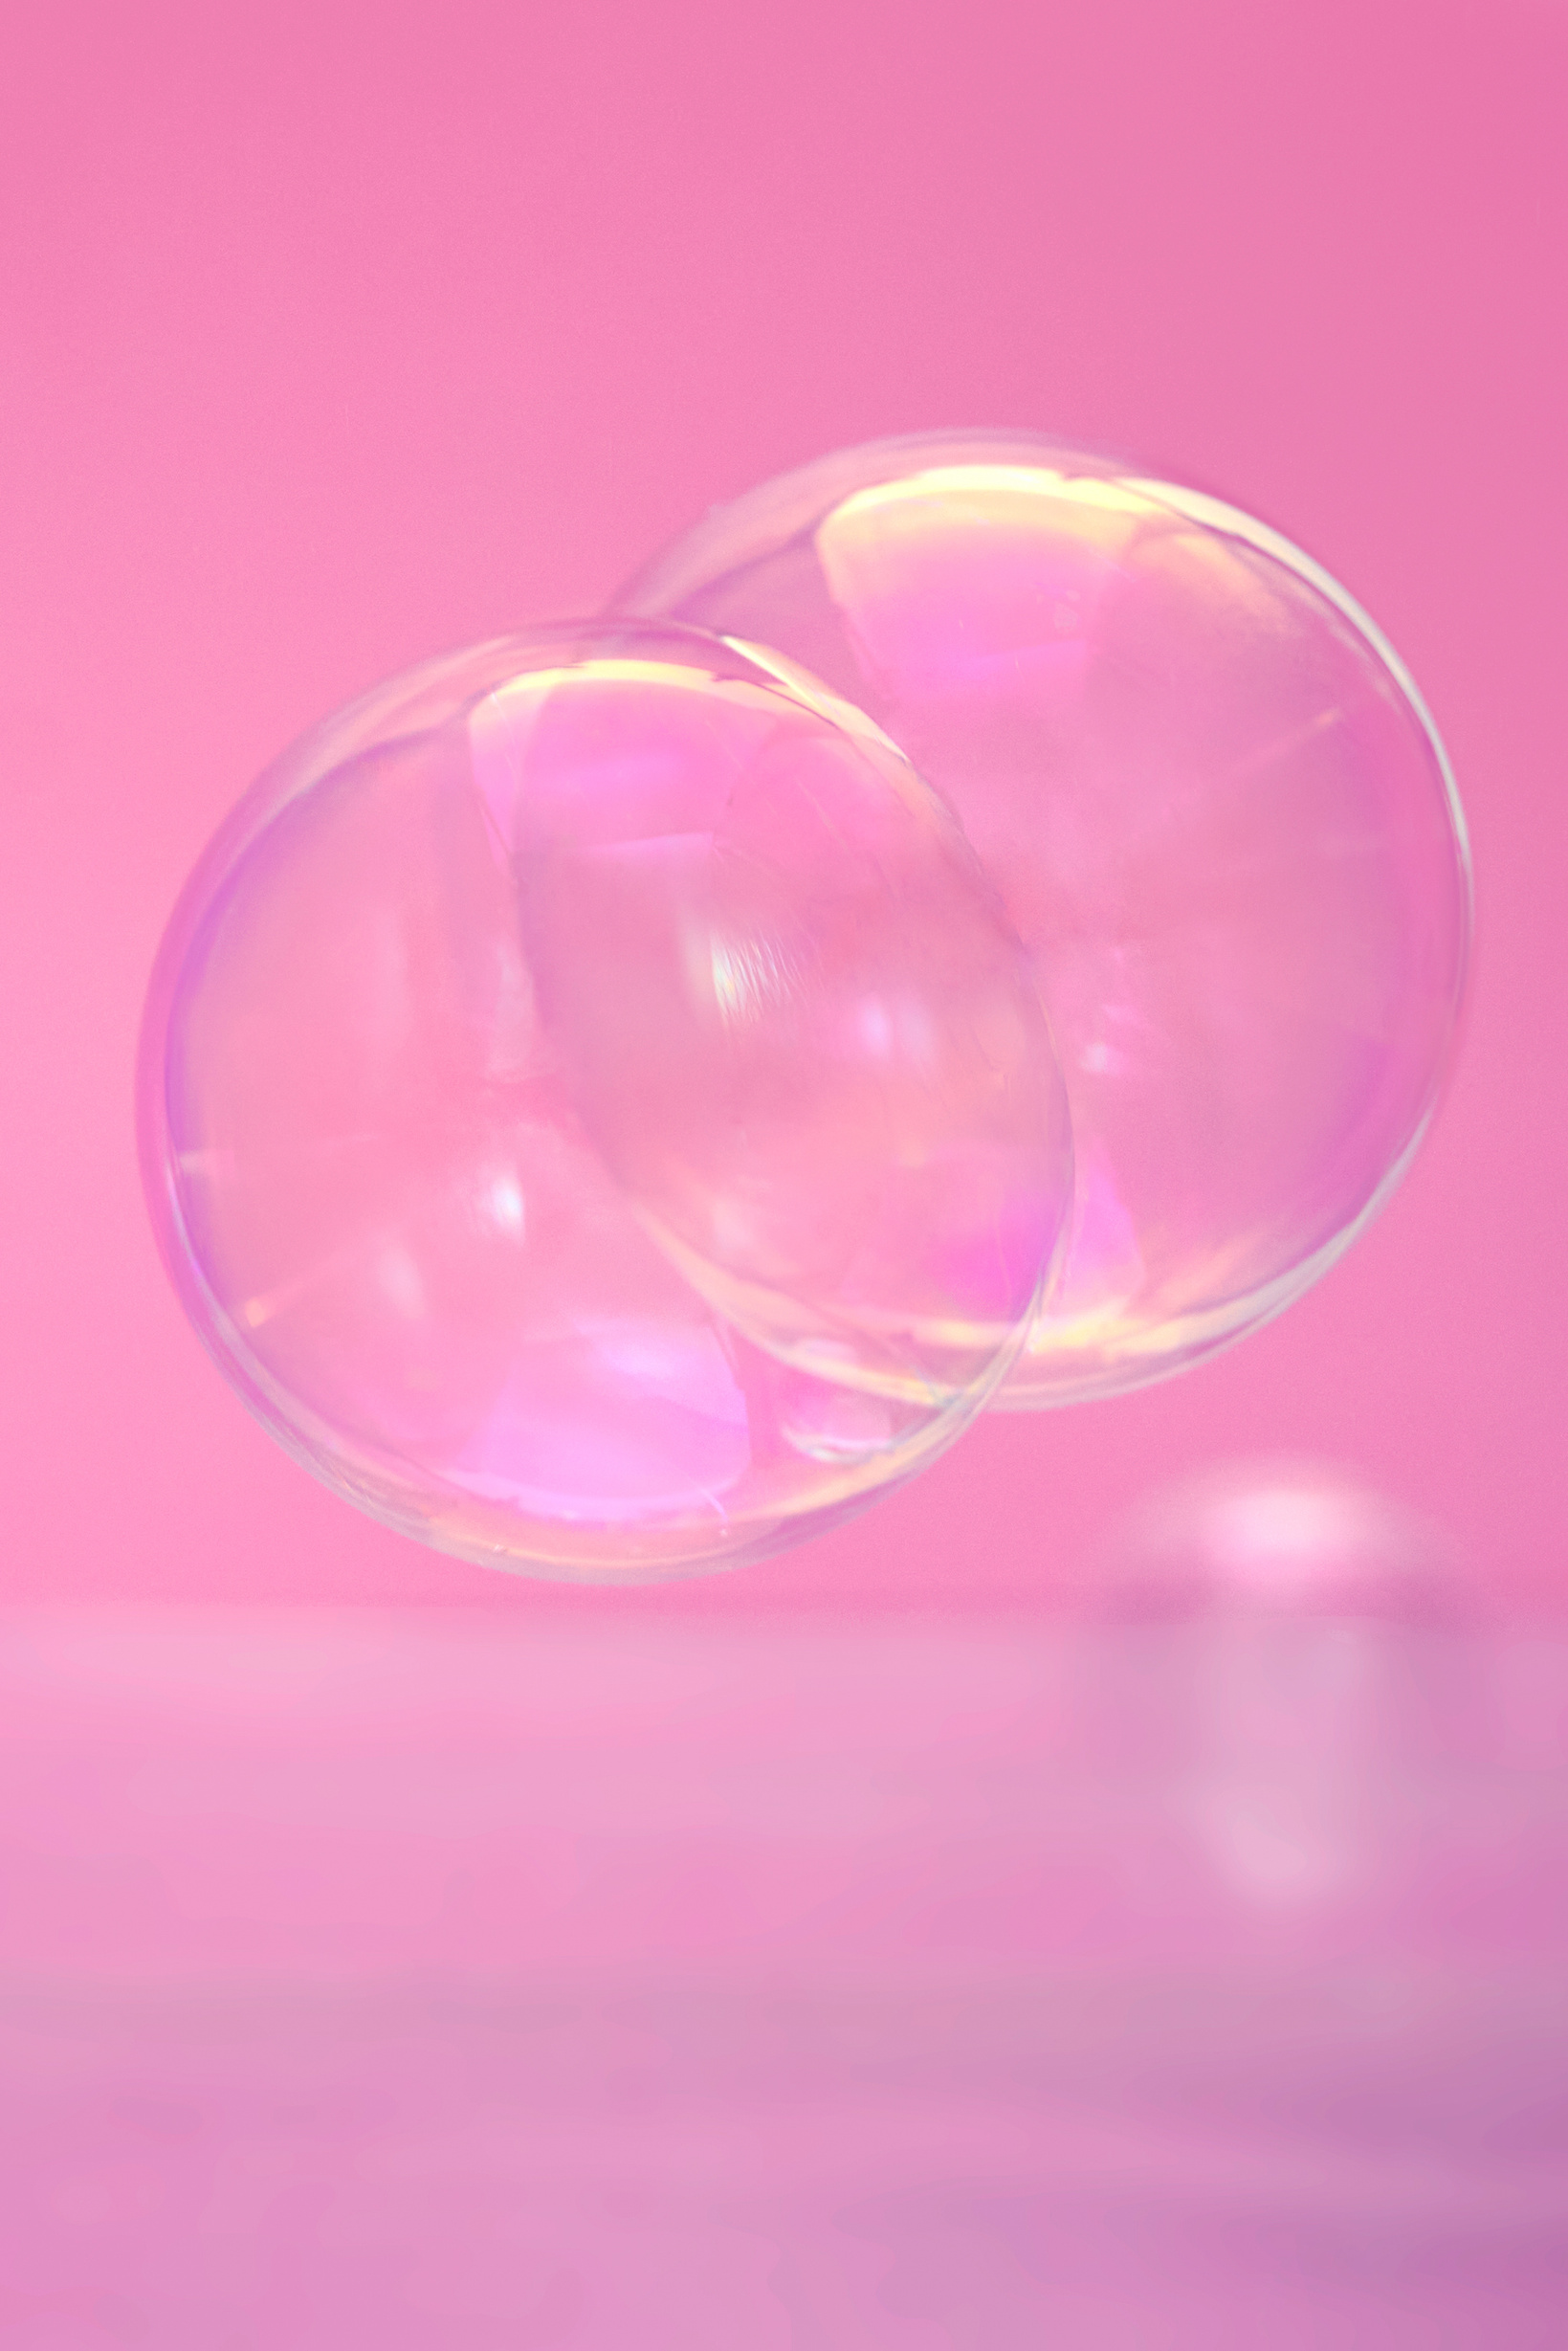 Bubbles on Pink Background